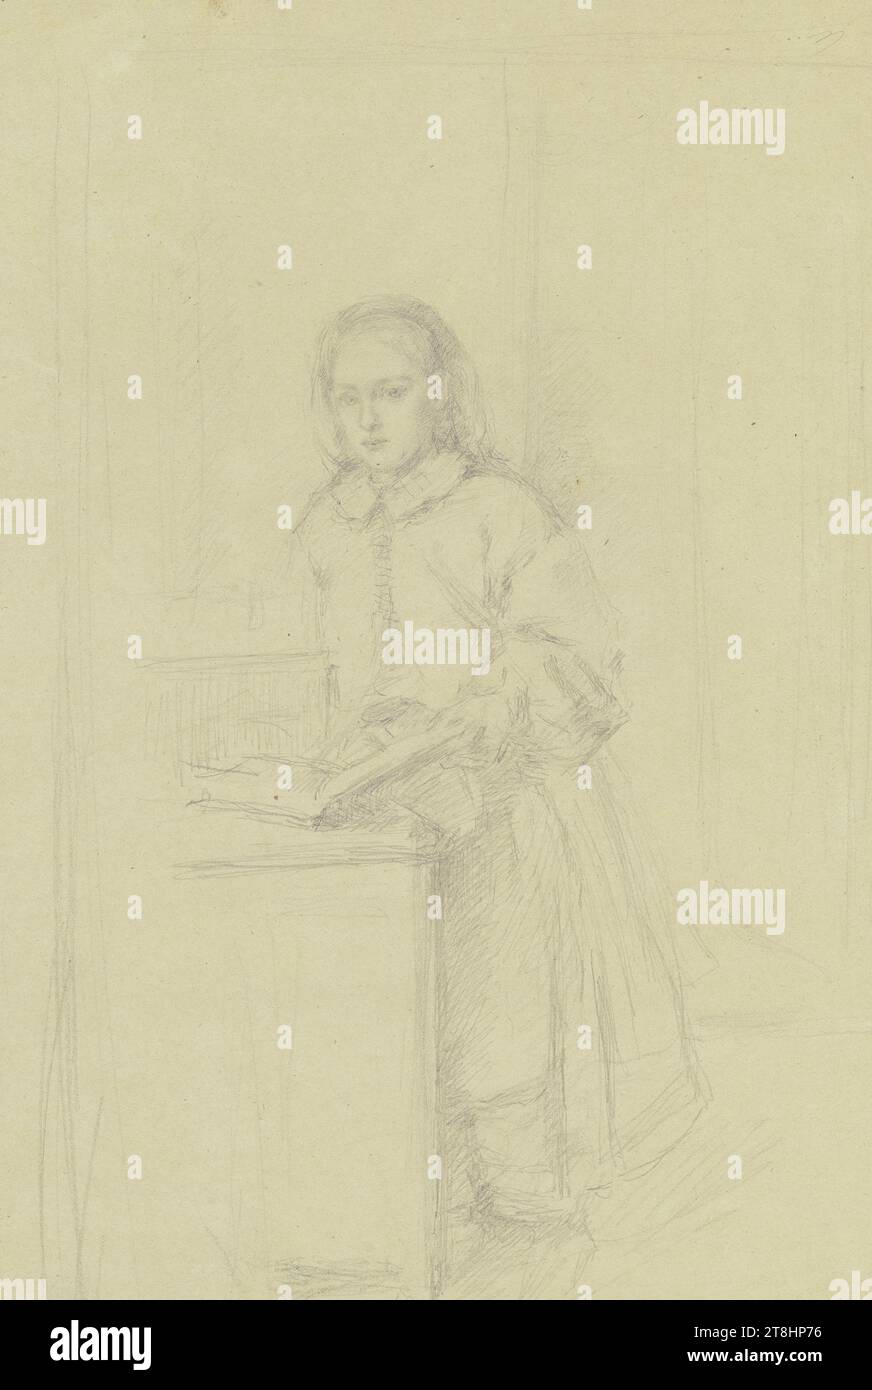 ANGILBERT GÖBEL, reading girl, approx. 1865, sheet, max. 310 x max. 209 mm, pencil on thin vellum paper, reading girl, ANGILBERT GÖBEL, 19TH CENTURY, DRAWING, pencil on thin vellum paper, GRAPHITE-CLAY MIXTURE, VELIN PAPER, PENCIL DRAWING, GERMAN, FIGURE STUDY, PORTRAIT STUDY? Stock Photo